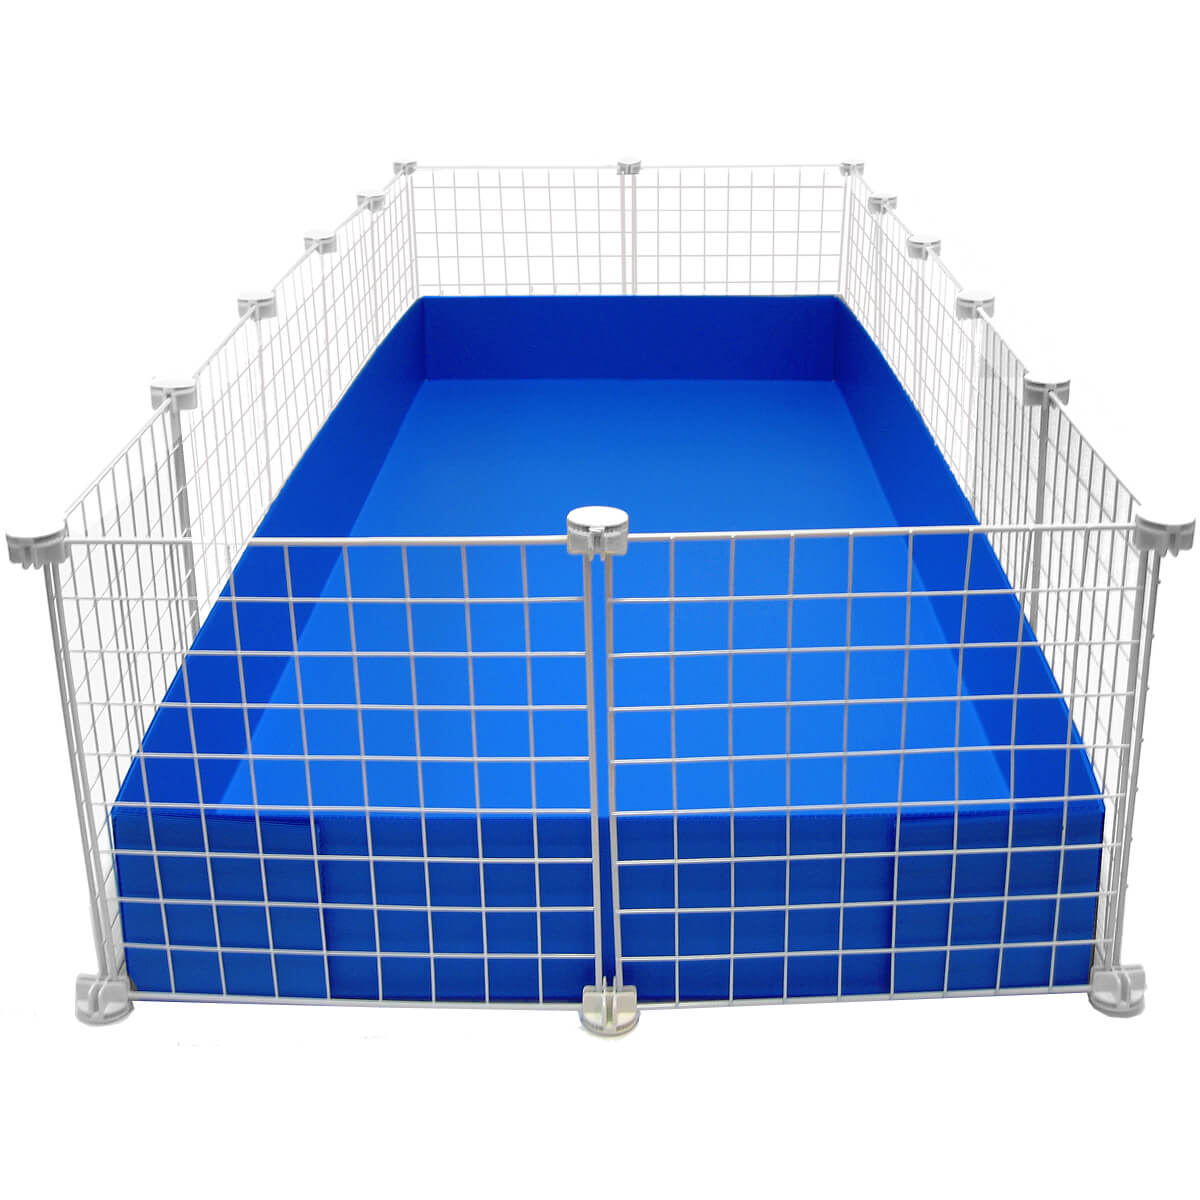 https://www.guineapigcagesstore.com/resize/Shared/Images/Product/XL-2x5-Grids-Cage/XLroyalside.jpg?bw=1000&w=1000&bh=1000&h=1000